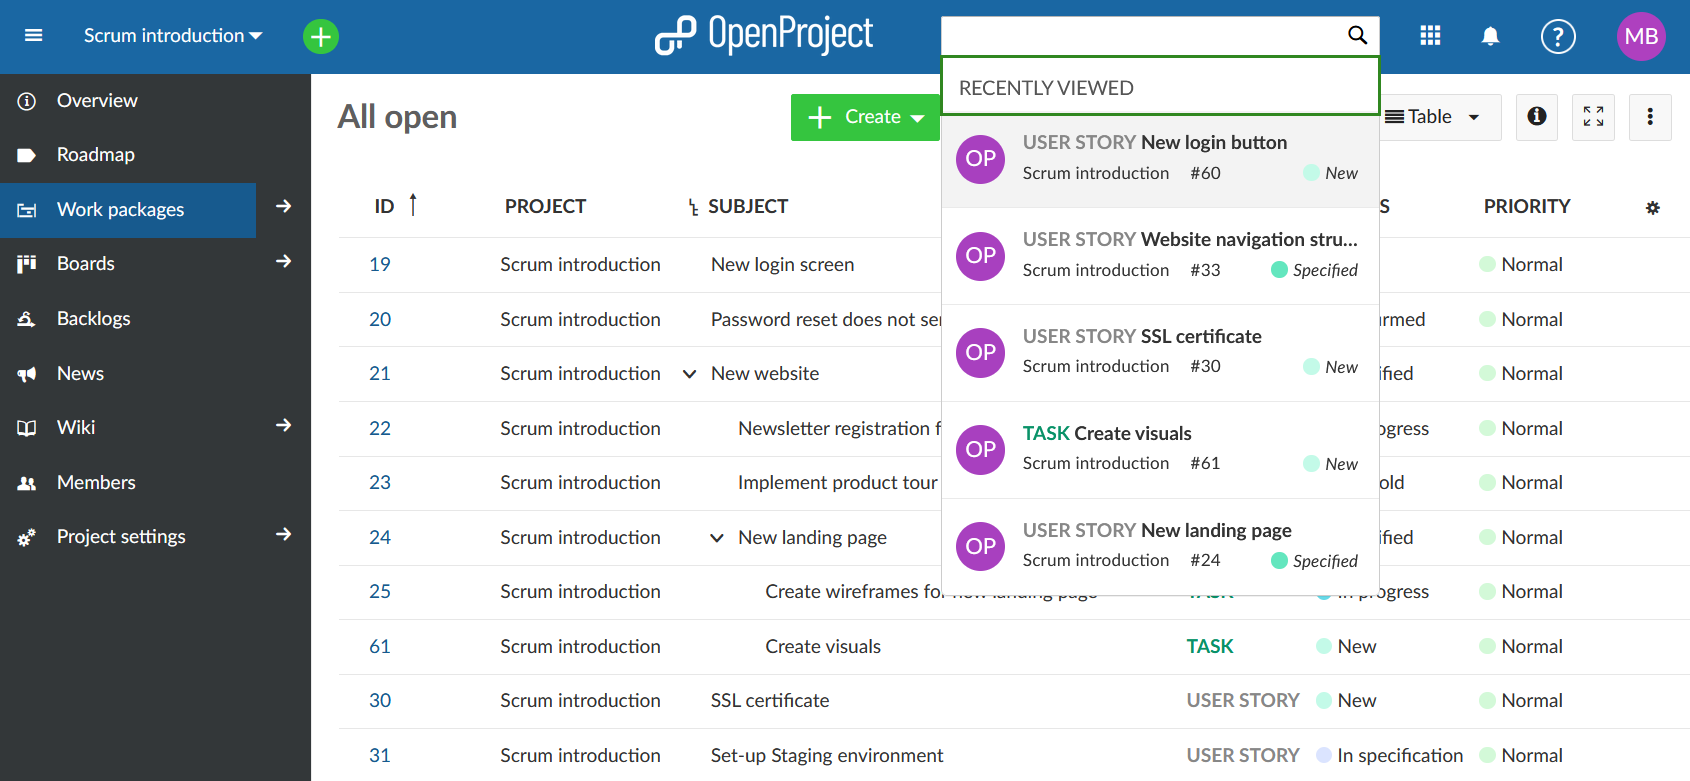 OpenProject recent work packages